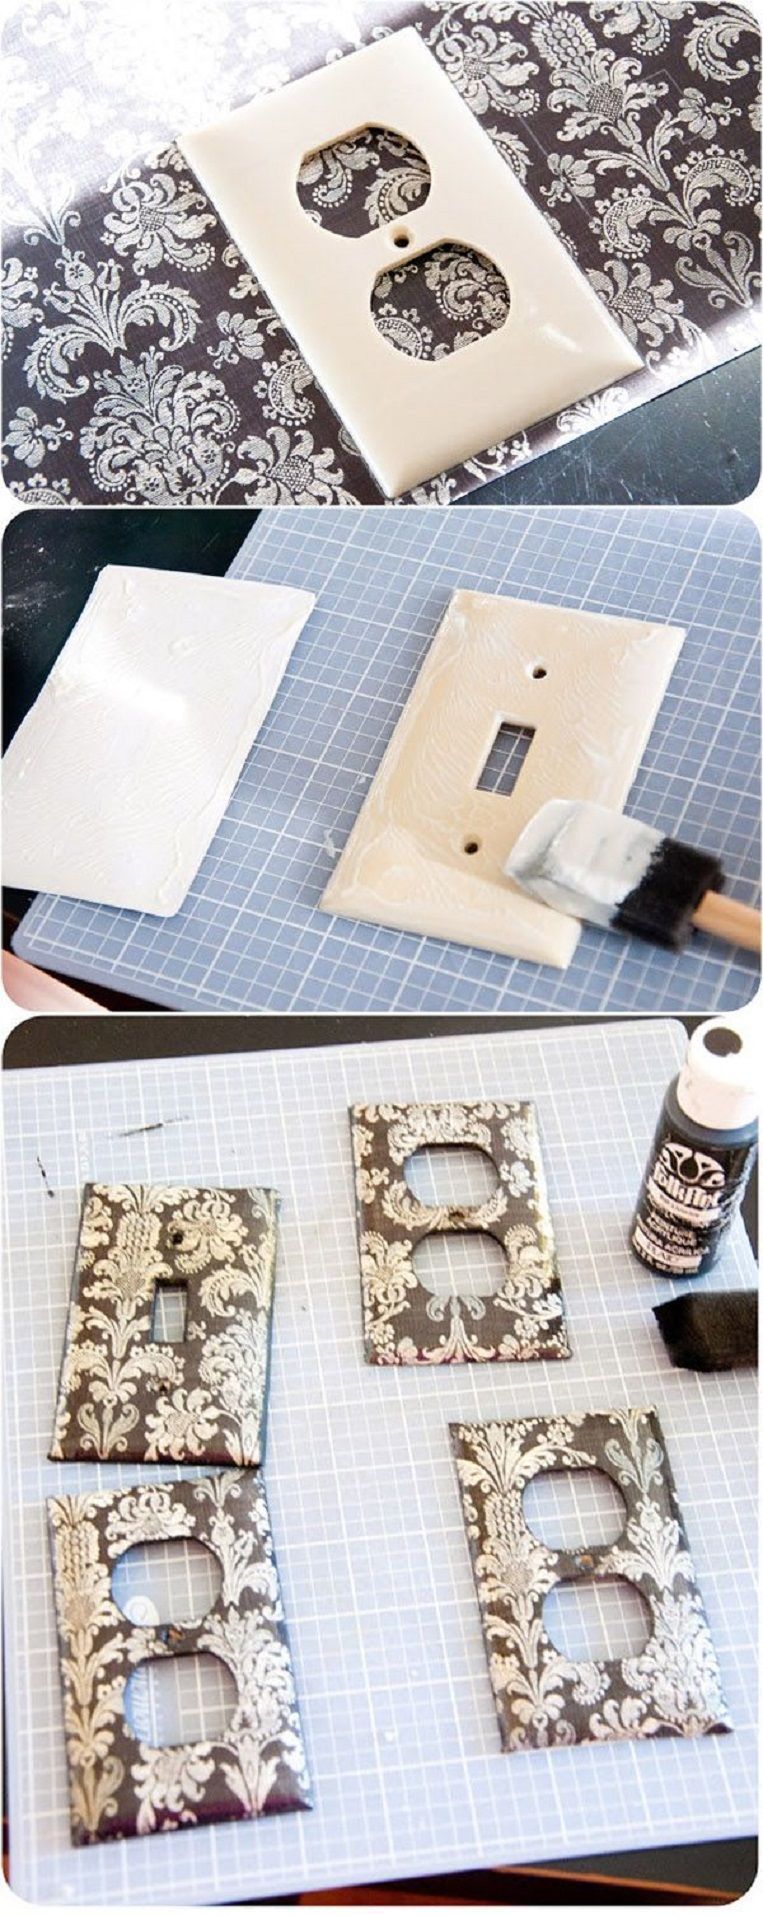 DIY switch plate covers wrapped in scrapbook paper could really make a big impact with very little effort or expense